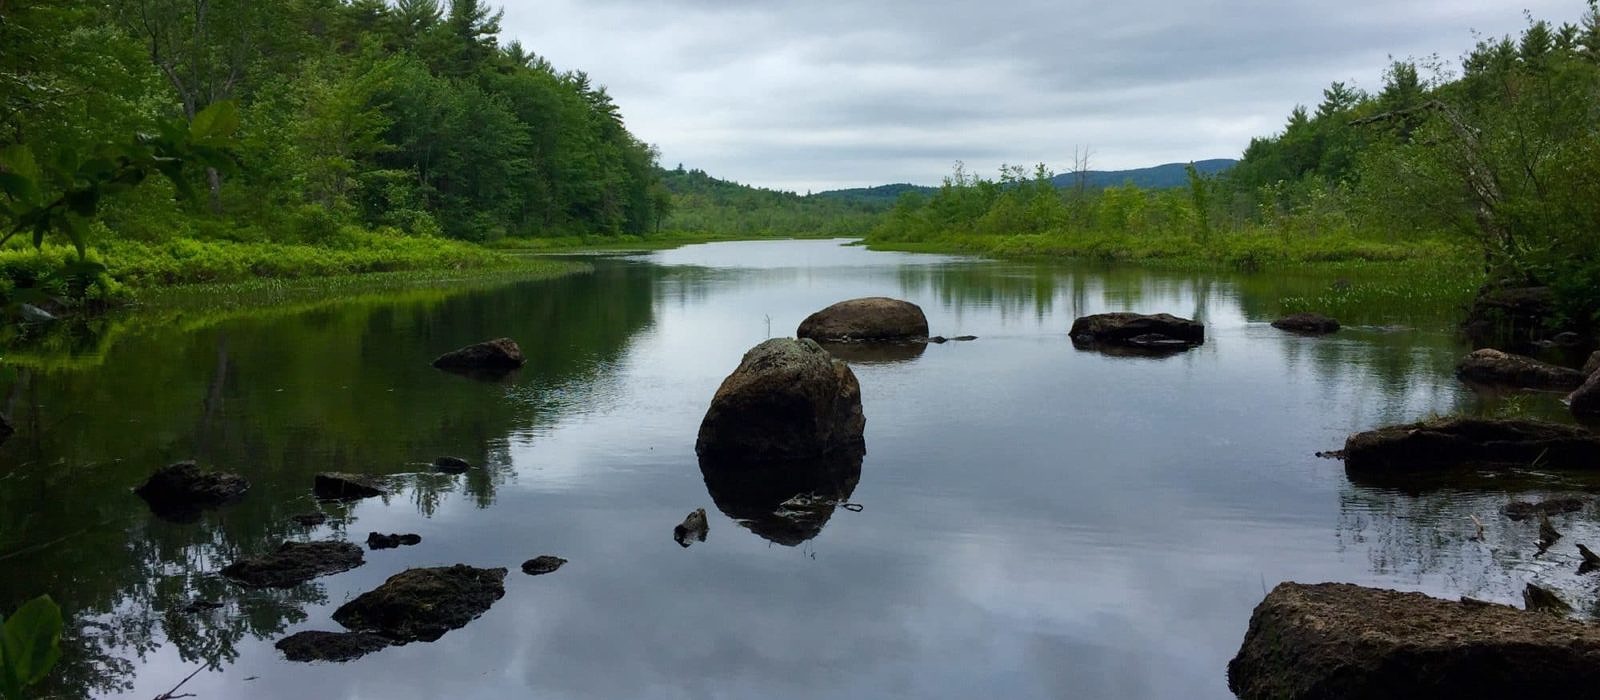 Dinsmore Pond, as viewed from the newly conserved Hiroshi Land. (photo © Will Holden)